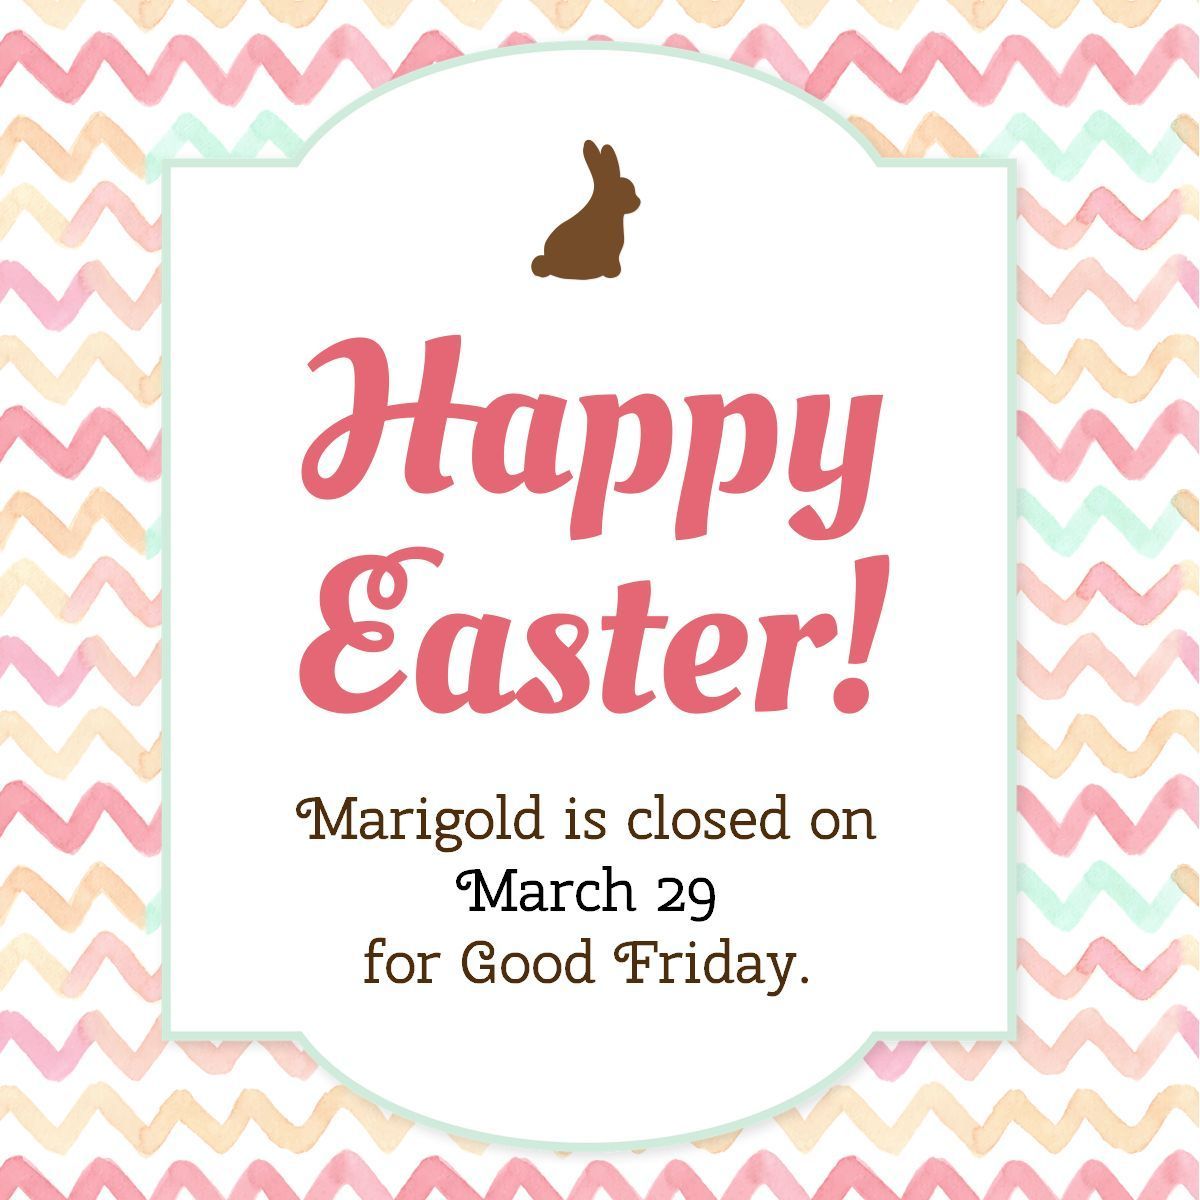 Happy Easter from Marigold! We are closed on March 29 for Good Friday. We hope you have a relaxing and fun-filled weekend.